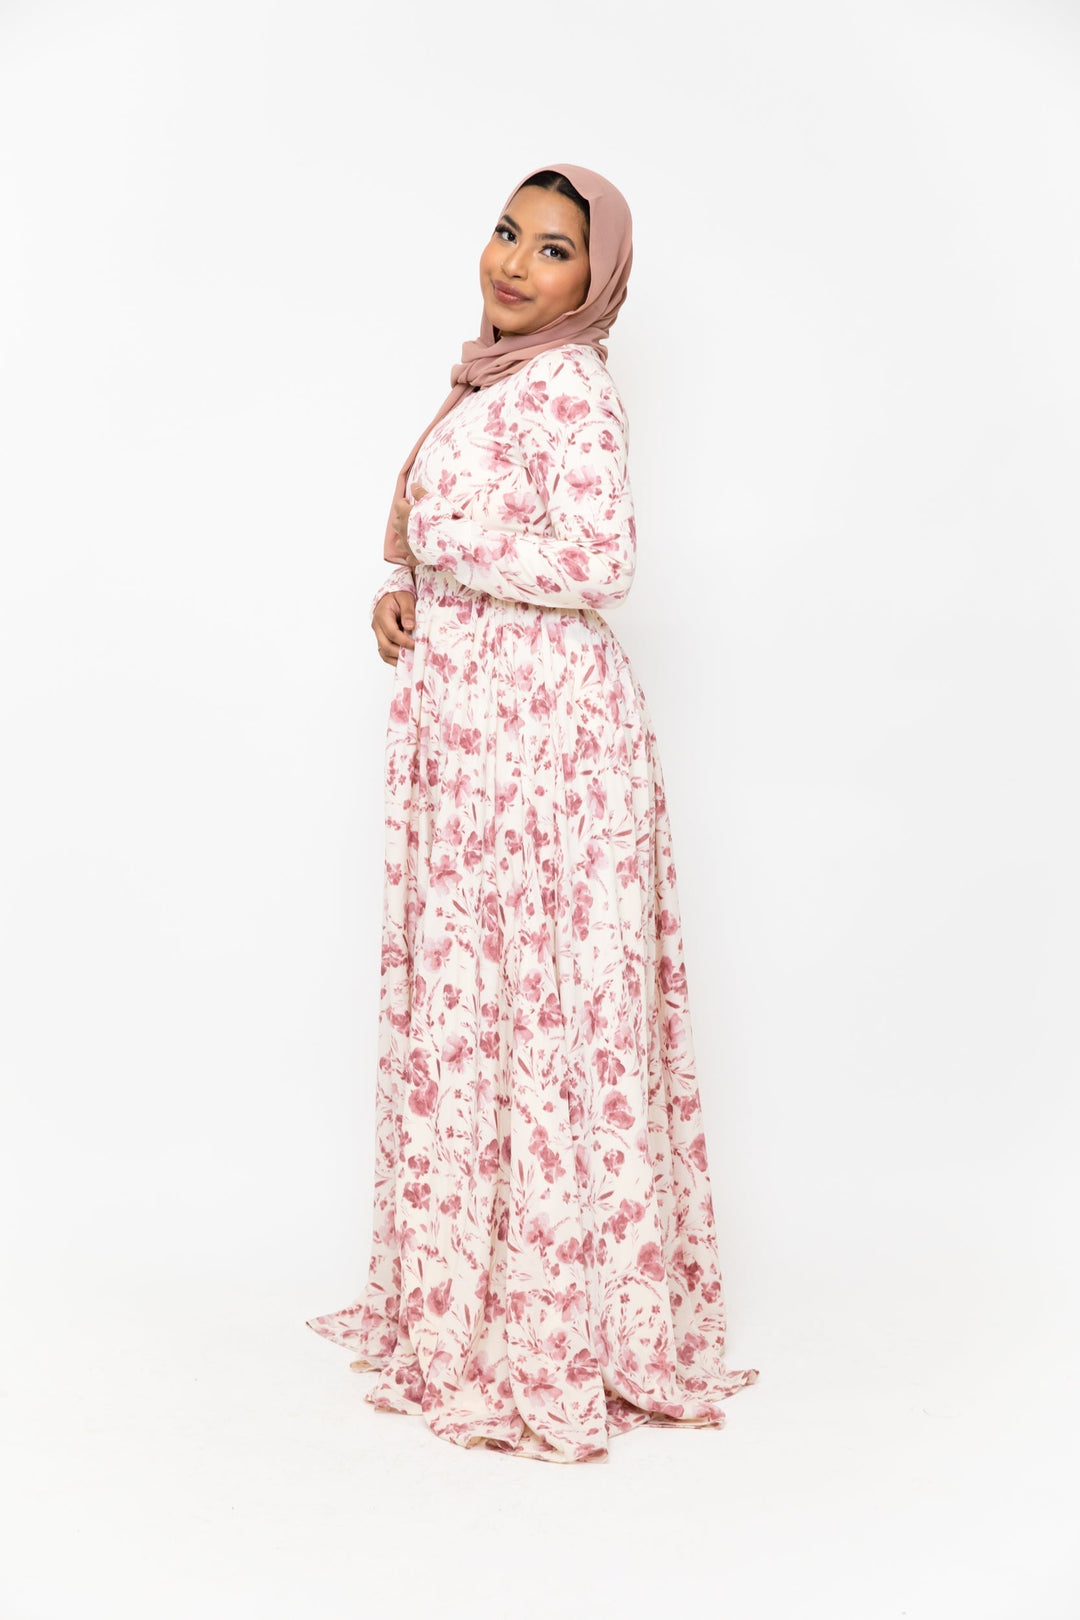 Urban Modesty - Pink and White Floral Chiffon Maxi Dress With Sleeves